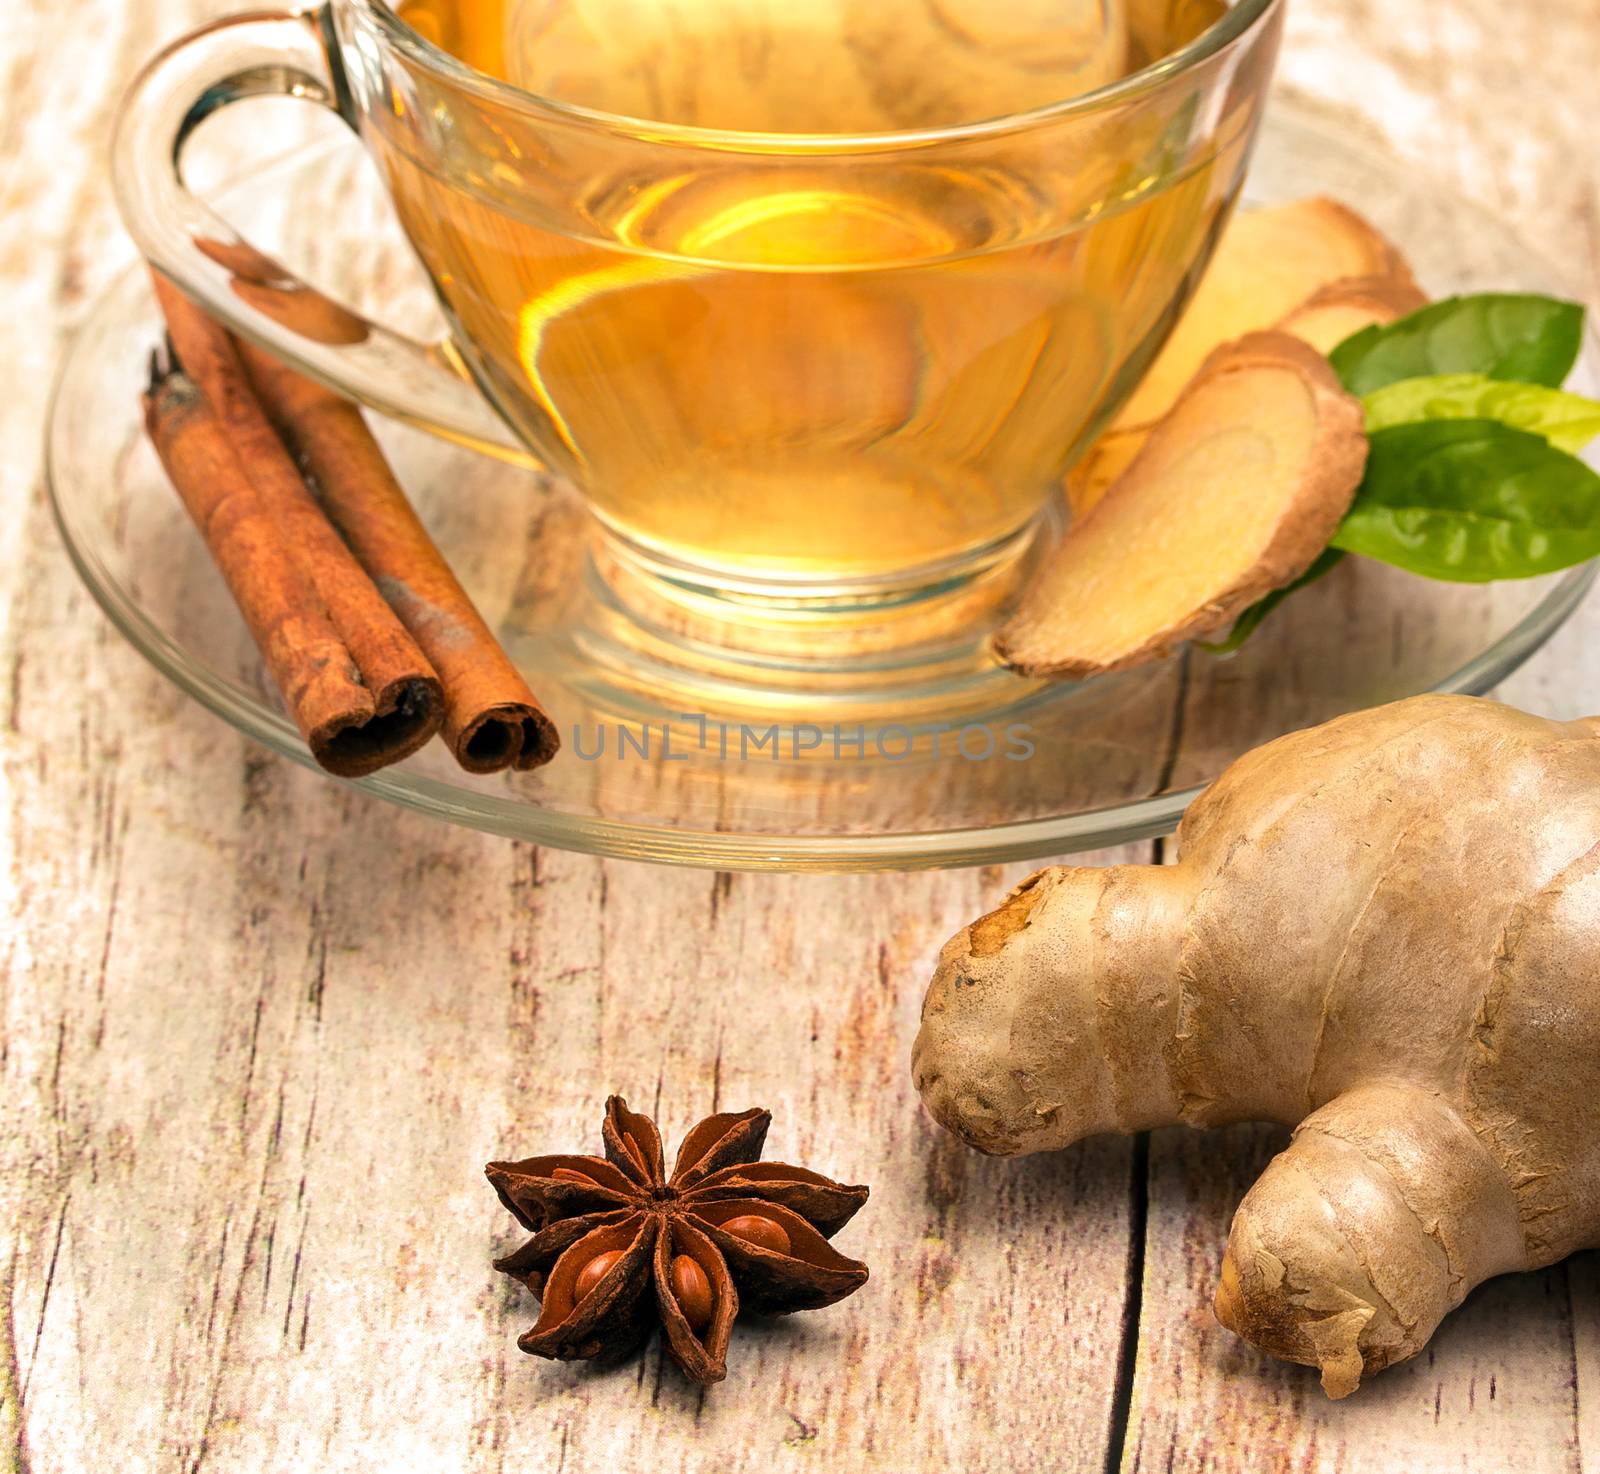 Spiced Ginger Tea Indicates Herbal Natural And Cinnamon  by stuartmiles